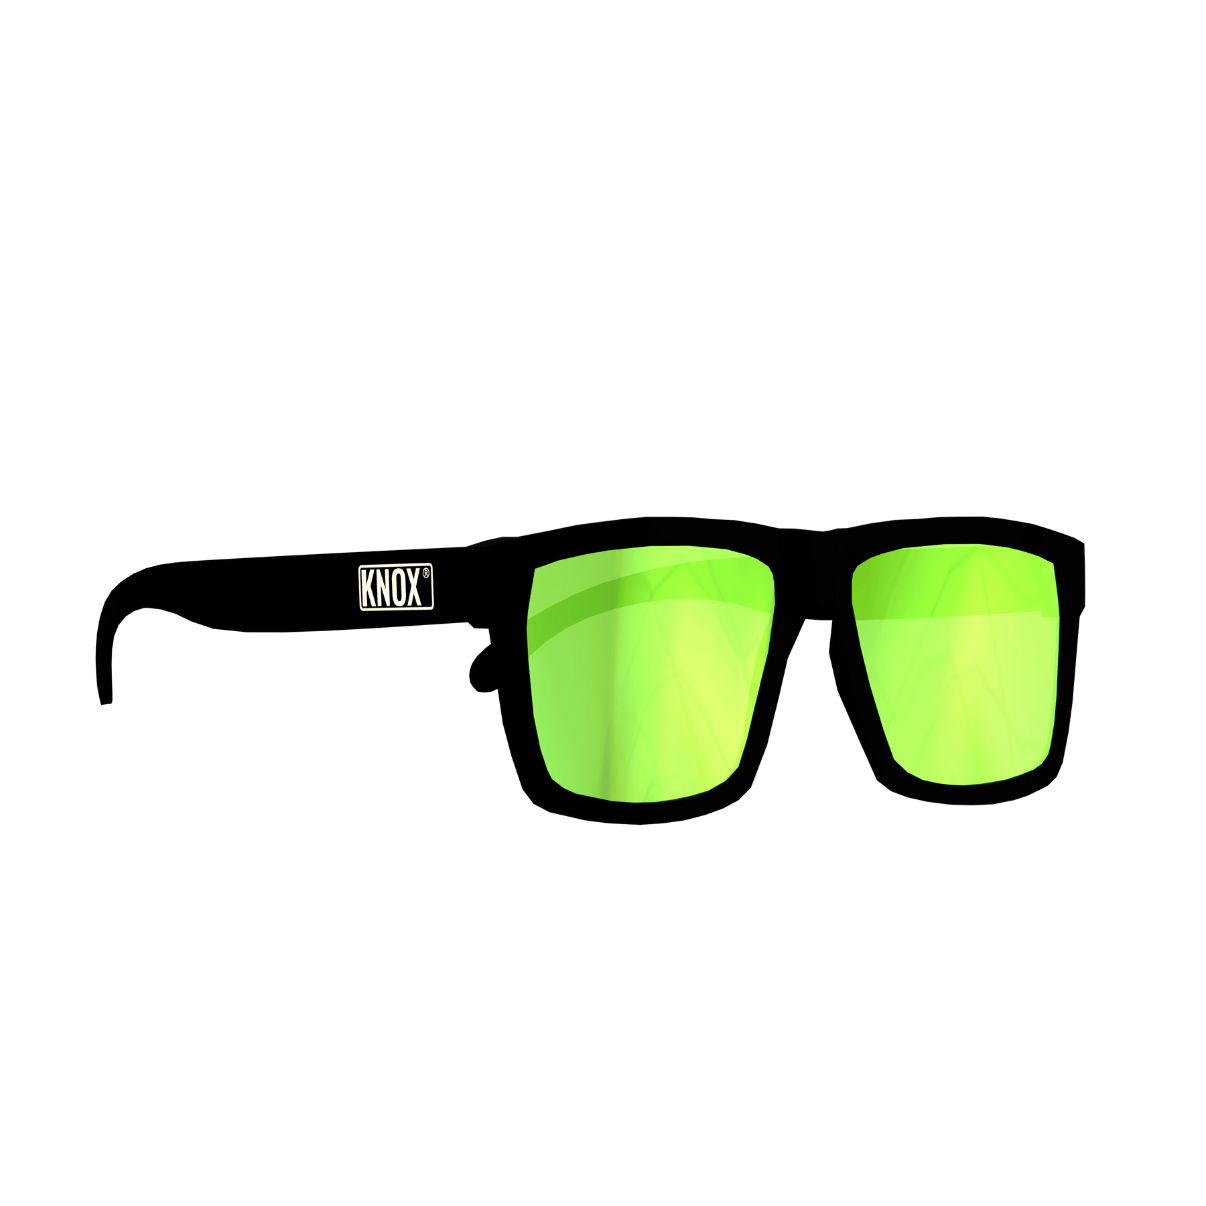 Knox Incorporated Apparel & Accessories The Badger Z87 Sunglasses - Green